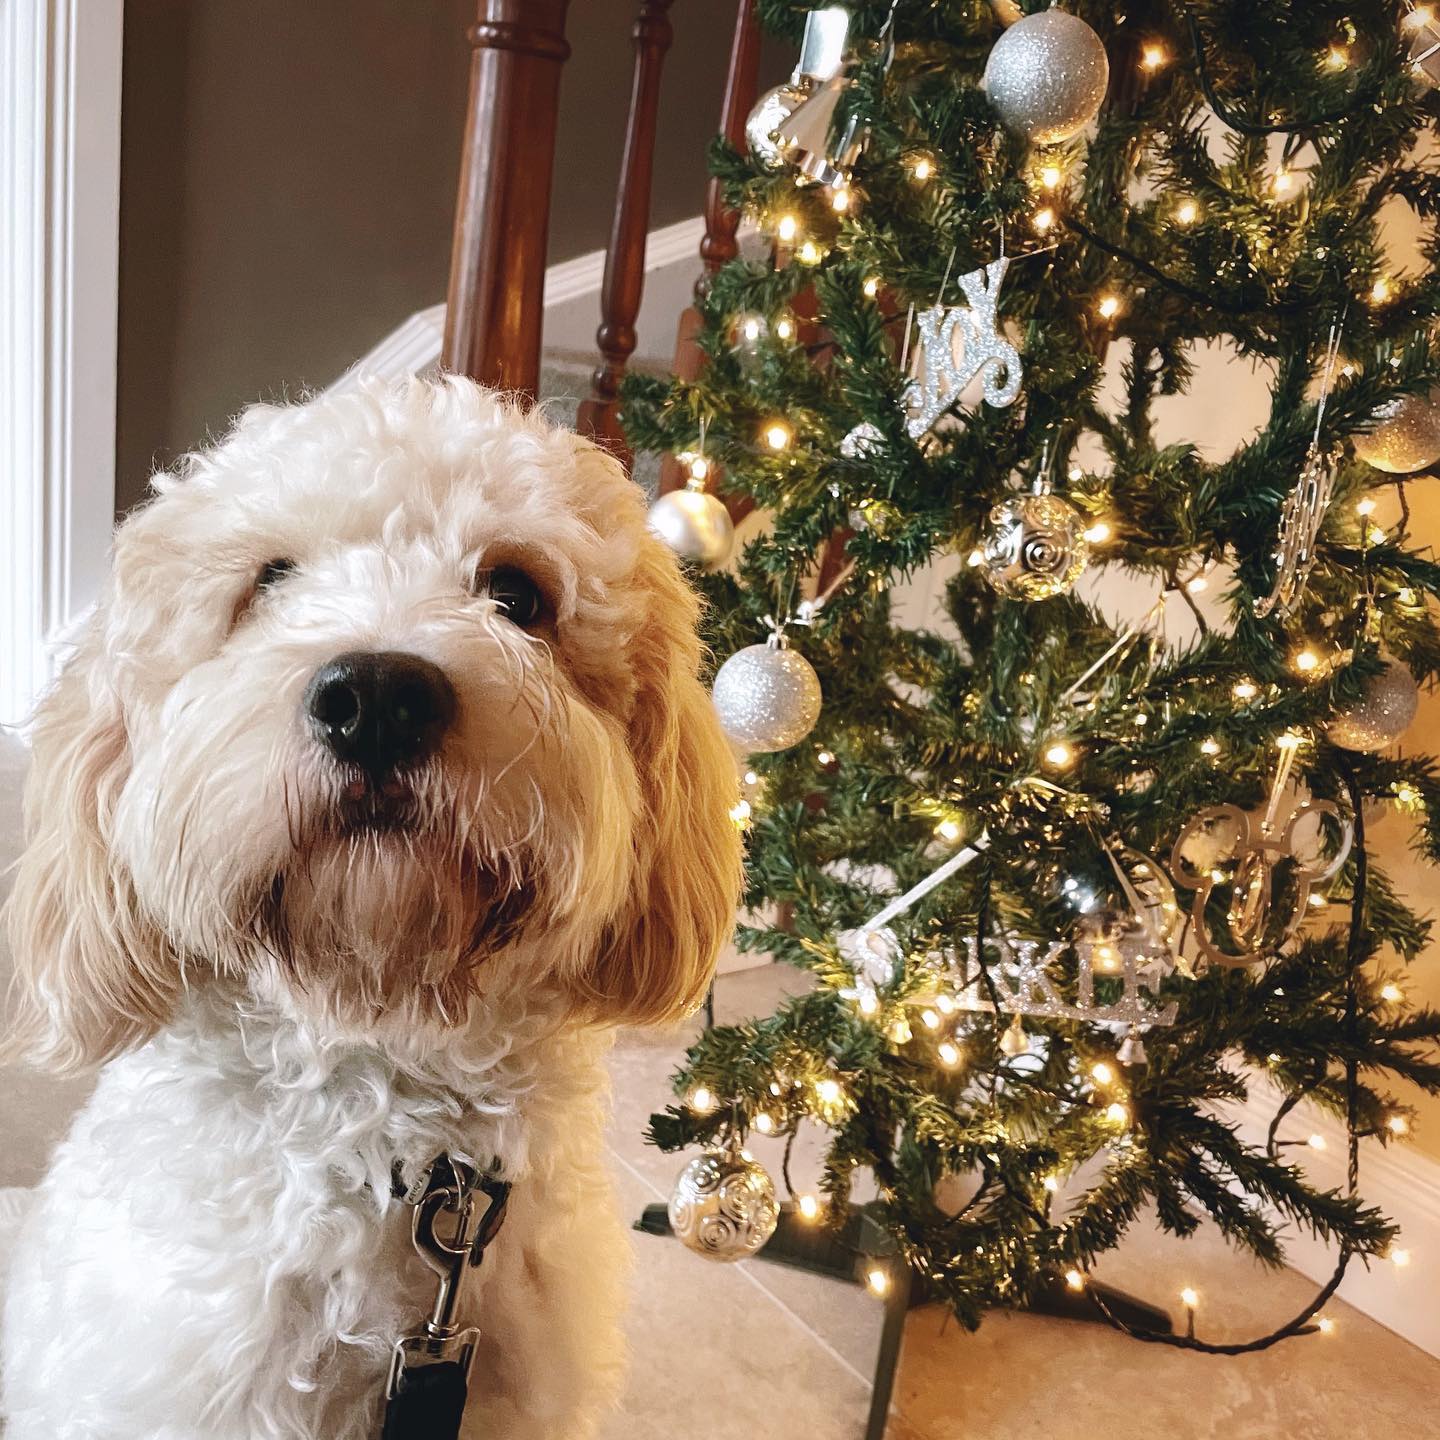 On the 13th of December.... Alfie and the Christmas treeIf you had told me a year ago I would have a puppy to sit (momentarily!) beside our Christmas tree I definitely wouldn't have believed you!